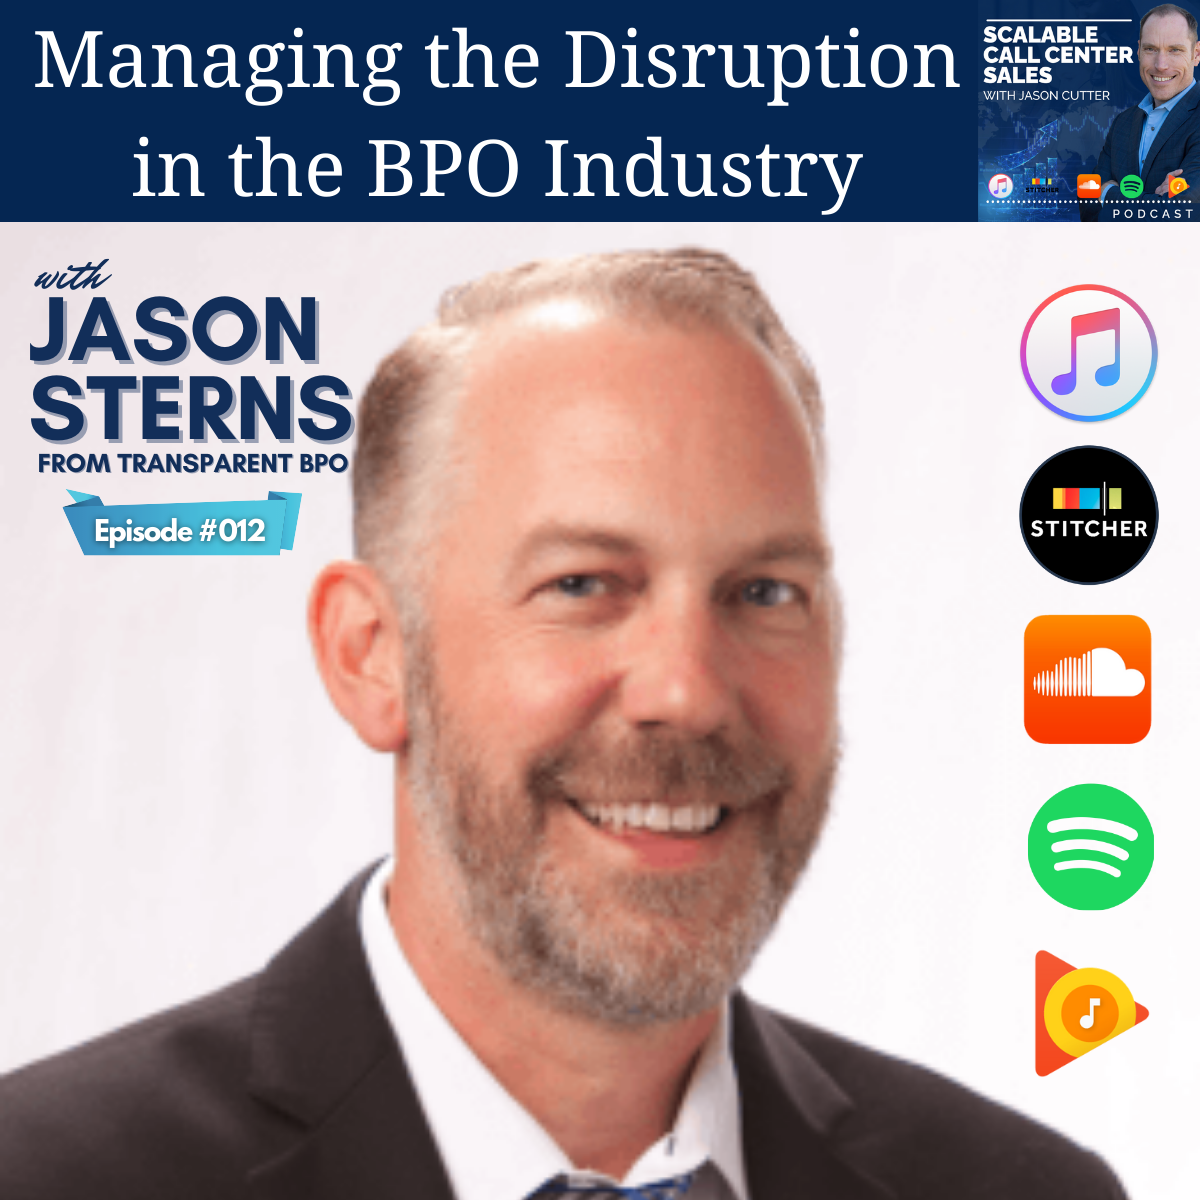 [012] Managing the Disruption in the BPO Industry, with Jason Sterns from Transparent BPO